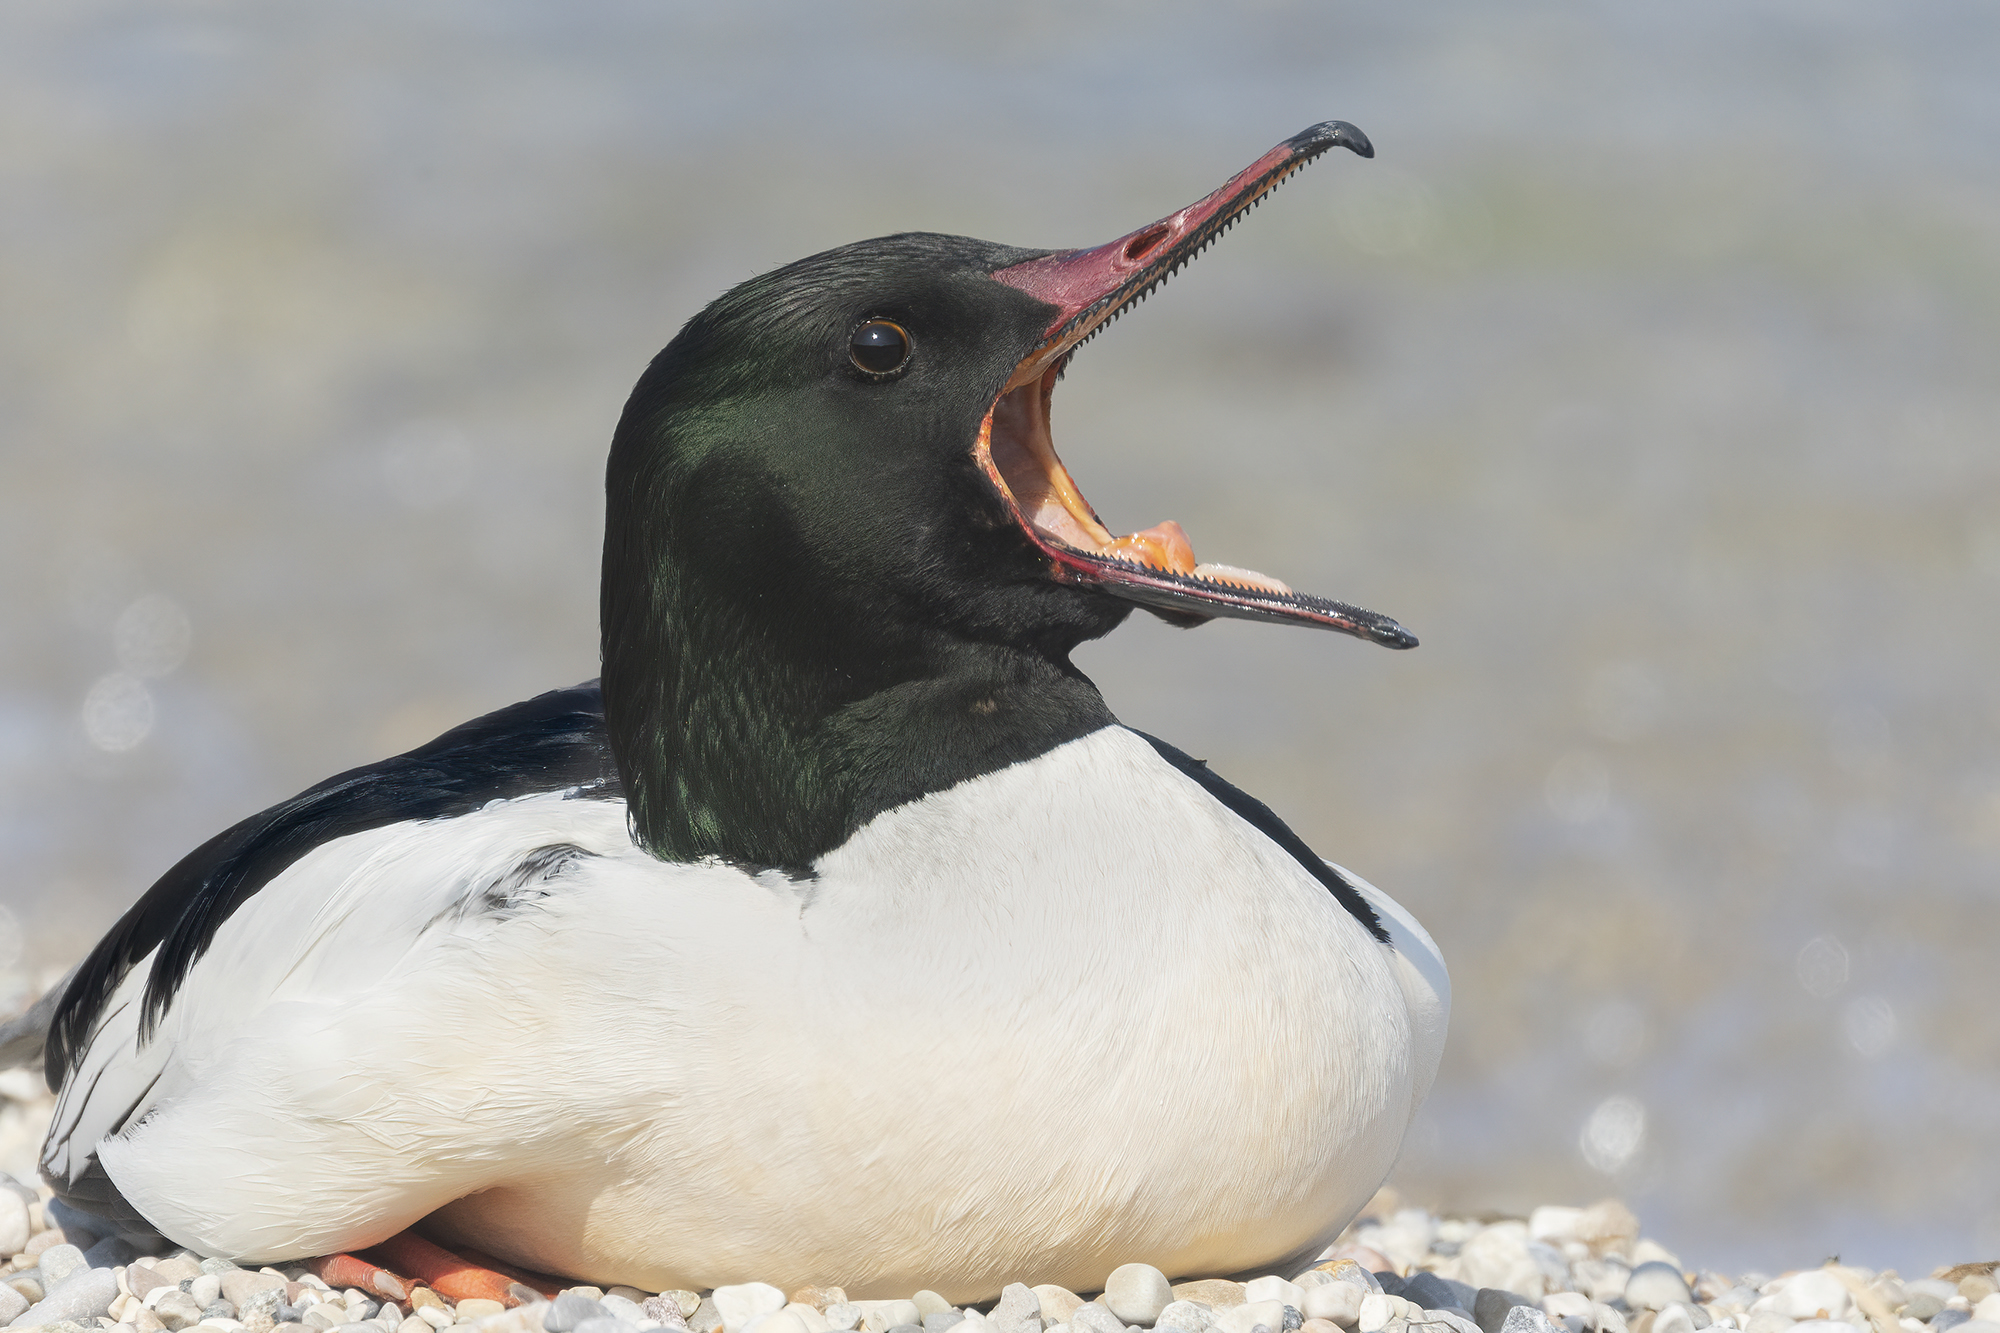 the yawn of the male greater merganser...